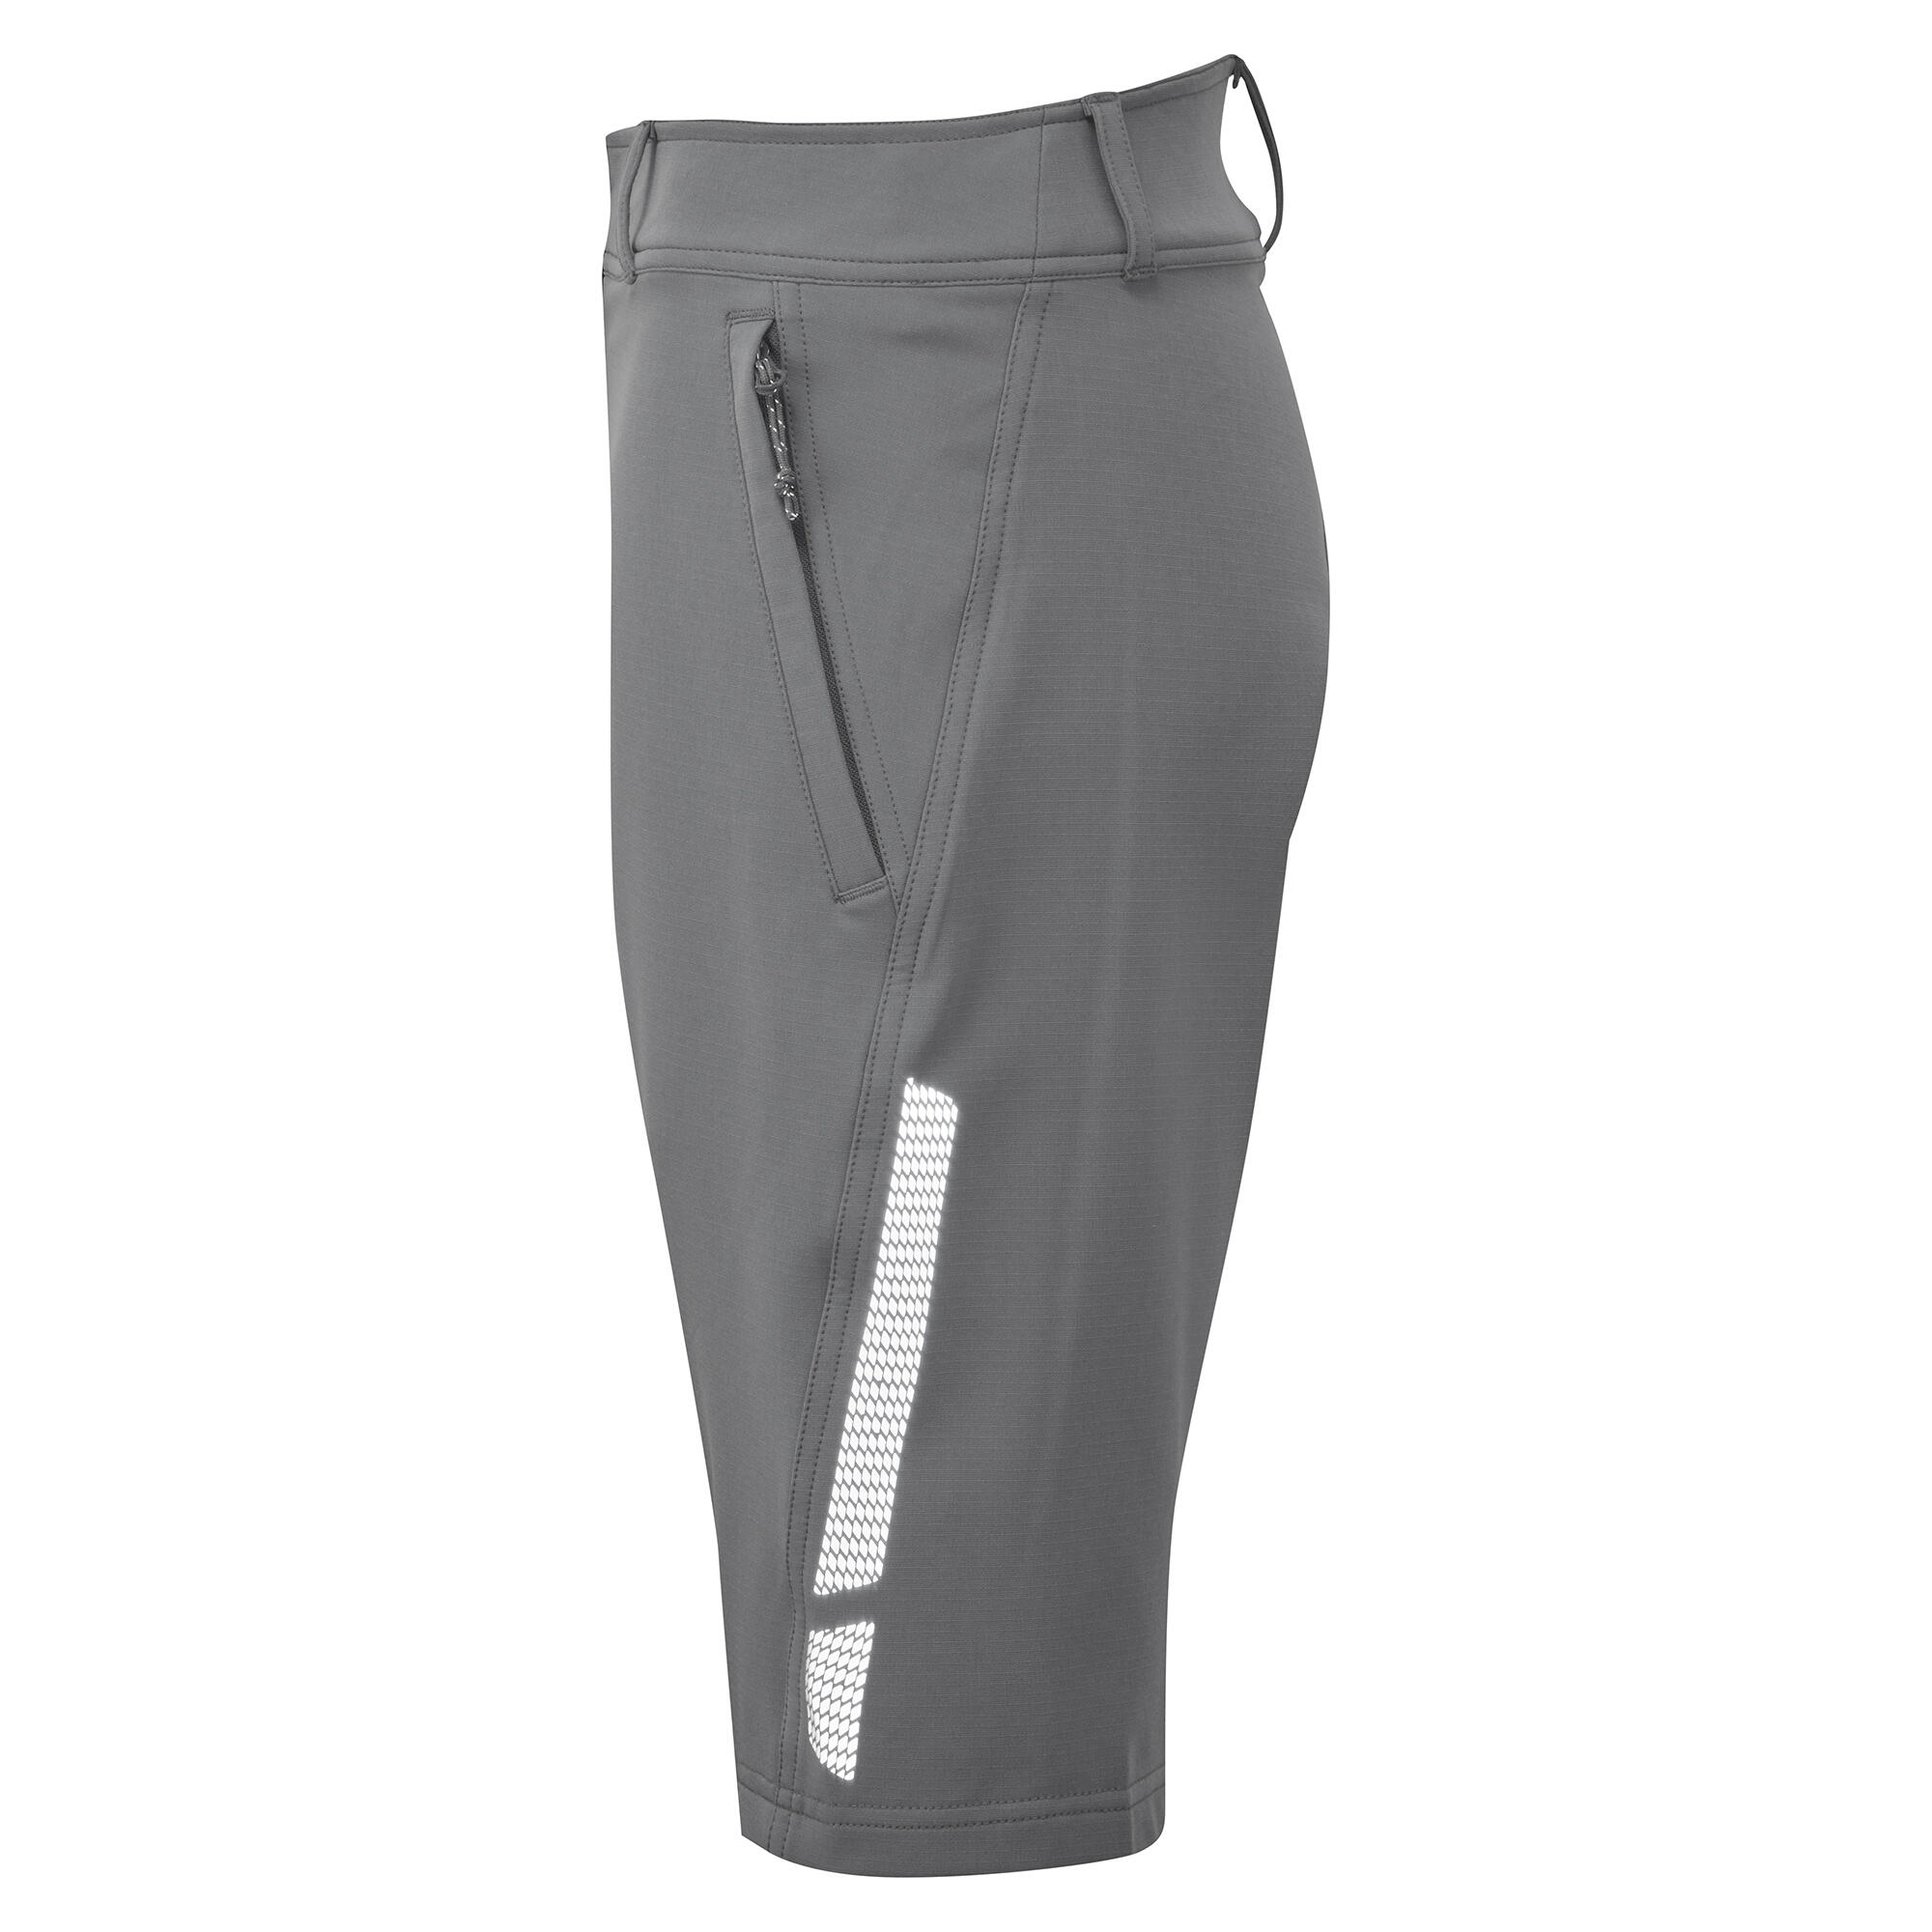 All Roads Women's Repel Cycling Shorts 5/5